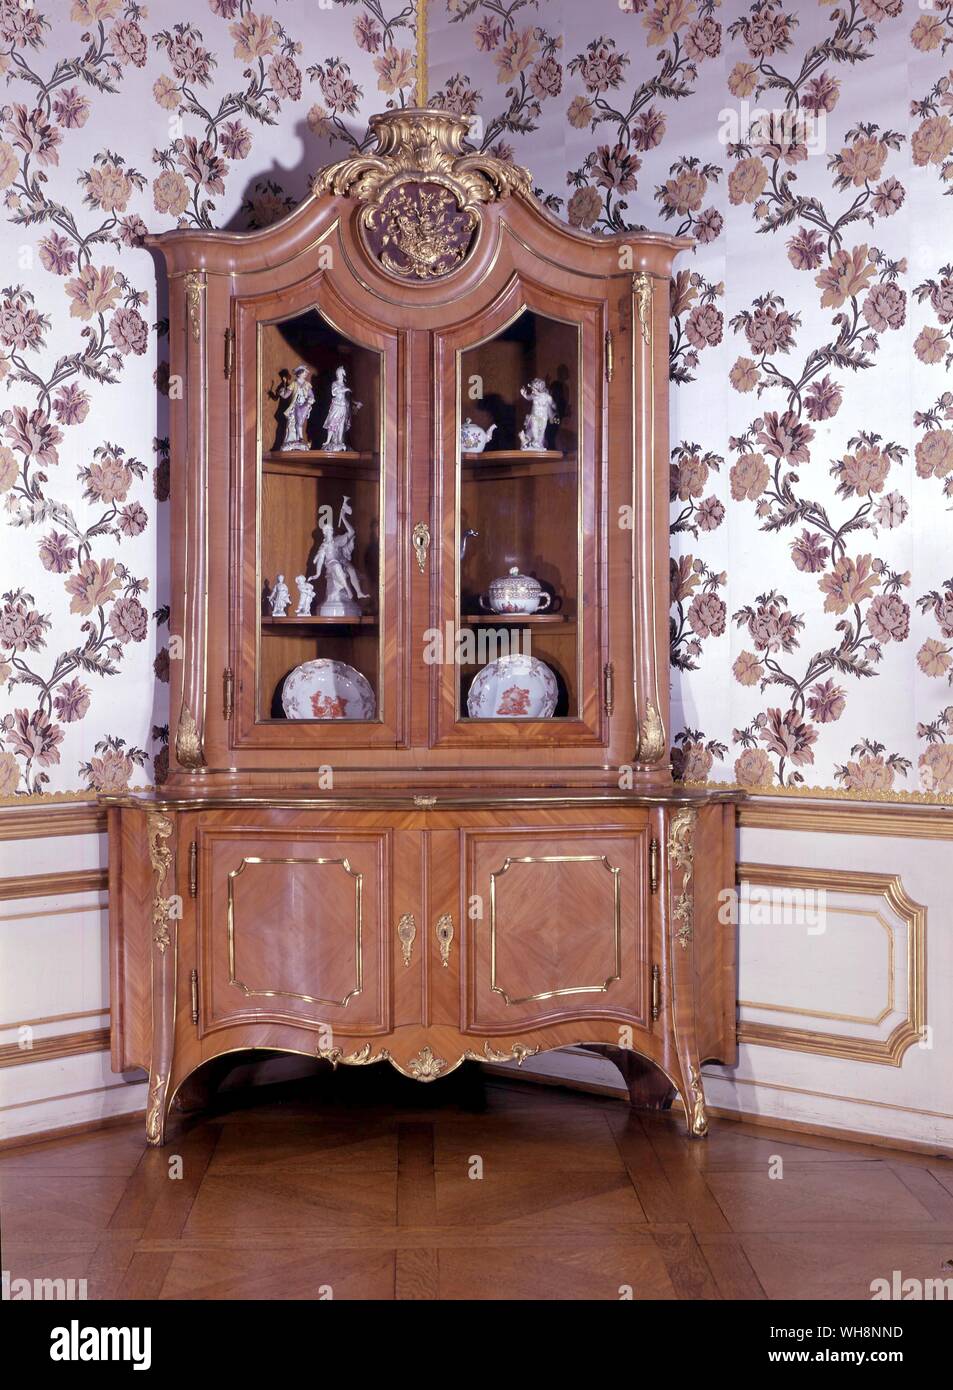 A corner cupboard of cedar wood with bronze fittings by J. A. Nahl, Berlin, about 1745, after a design by Knobelsdorff. The Berlin porcelain includes a shepherd and shepherdess by F. E. Meyer. a Gotzkowski teapot. a cherub from the service of the Potsdam palace. Fama, also by F. E. Meyer. two figures by C. W. Meyer and two plates from the Charlottenburg service. Stock Photo